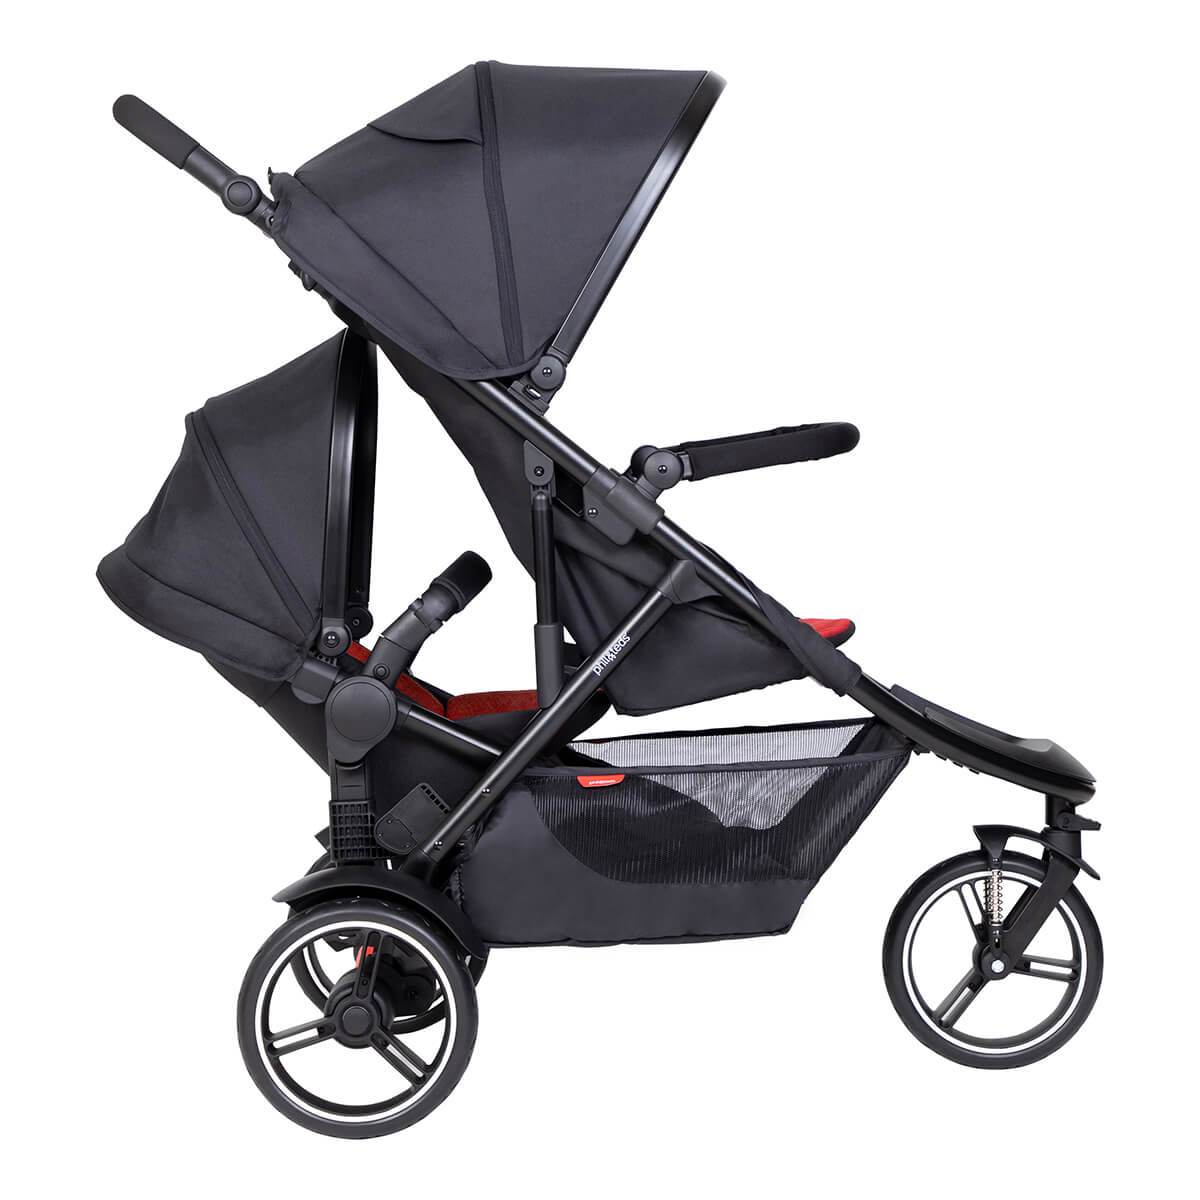 dot pram with toddler front seat and double kit second seat at rear